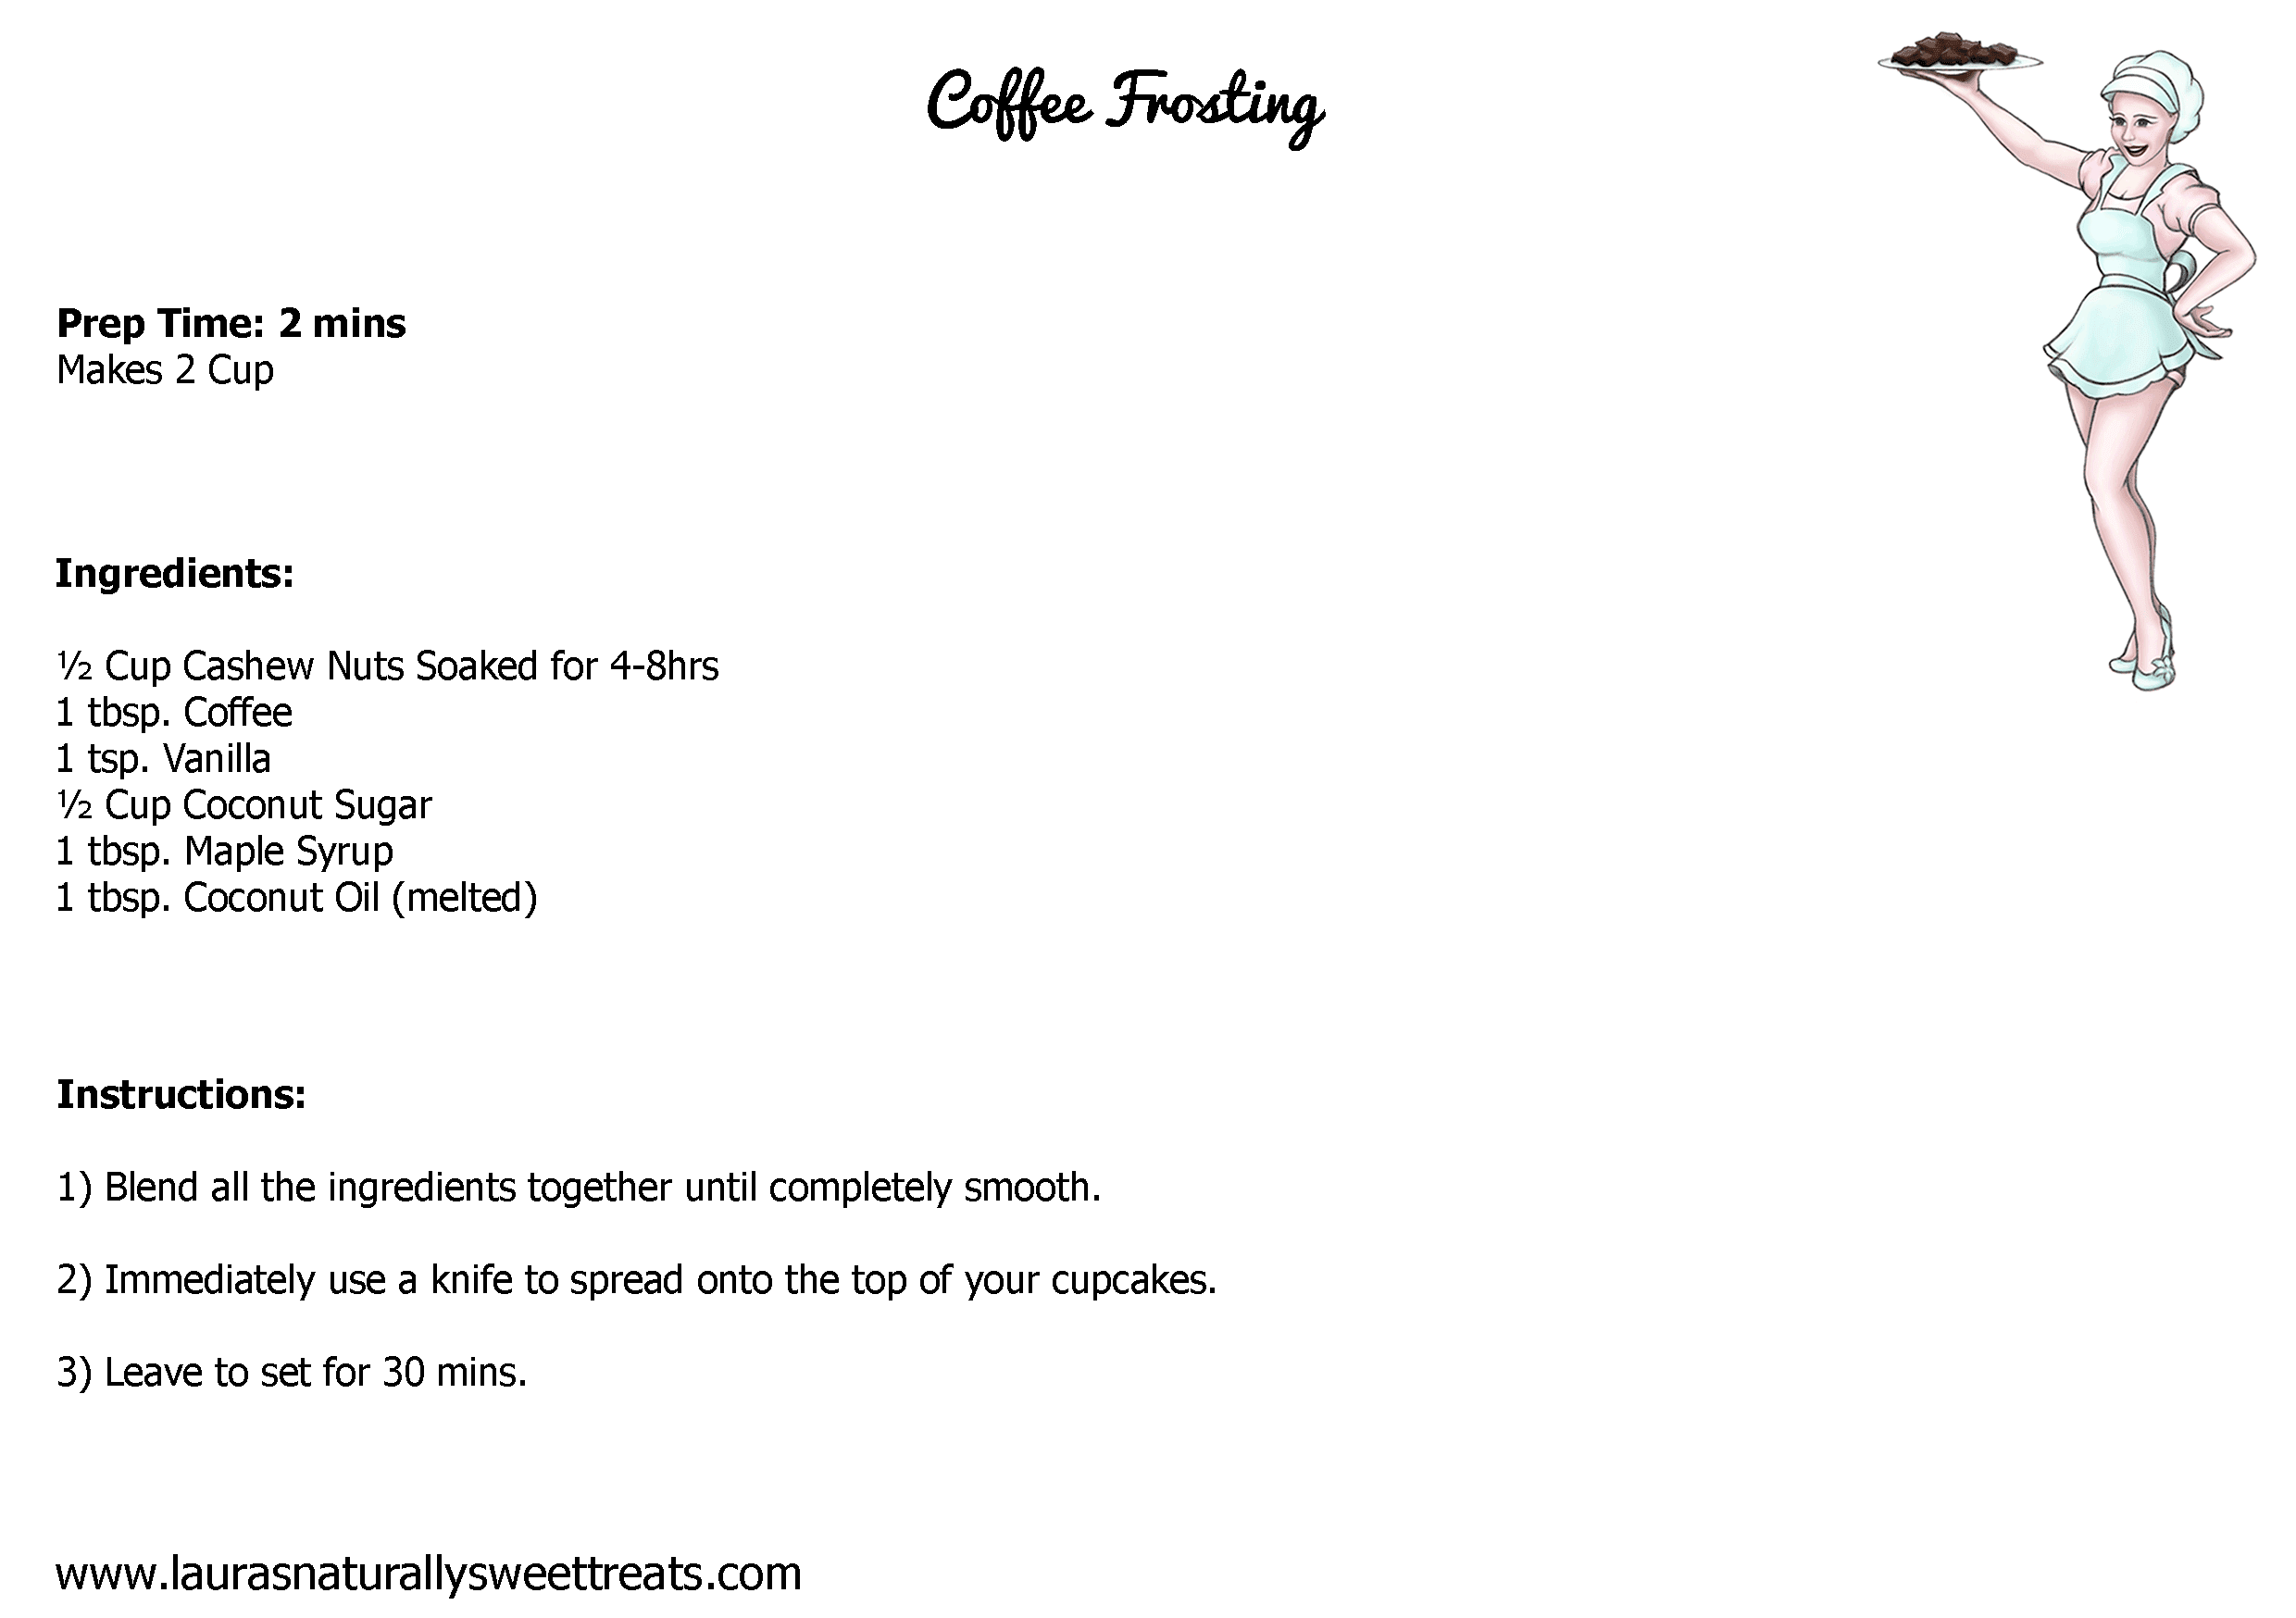 coffee-frosting-recipe-card